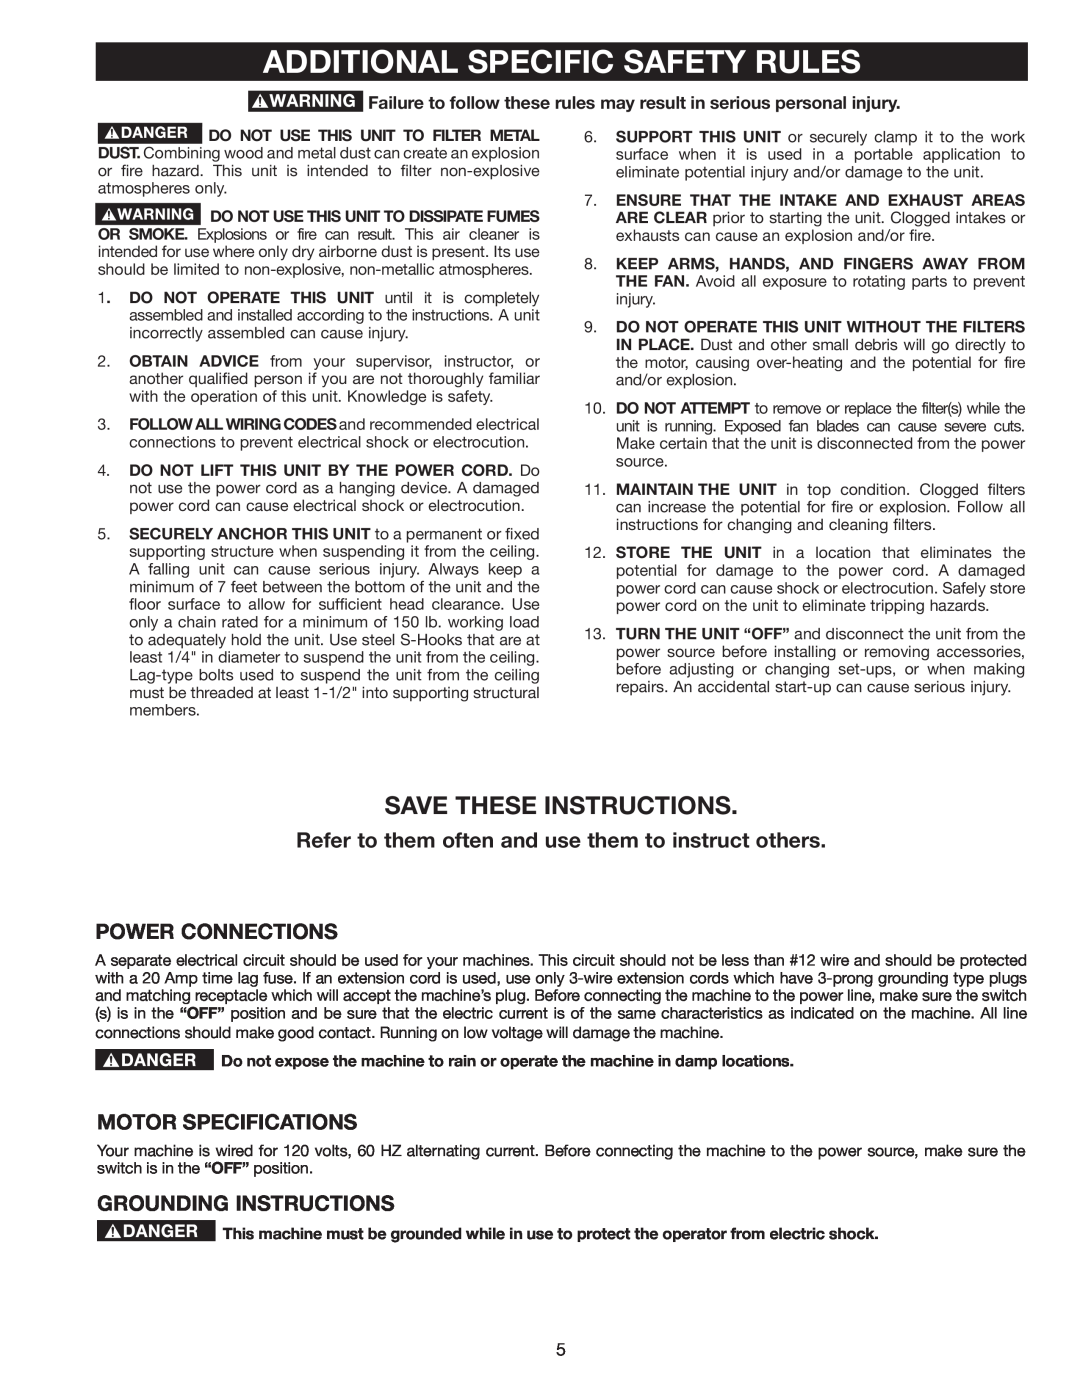 Delta AP-100 Additional Specific Safety Rules, Save These Instructions, Power Connections, Motor Specifications 